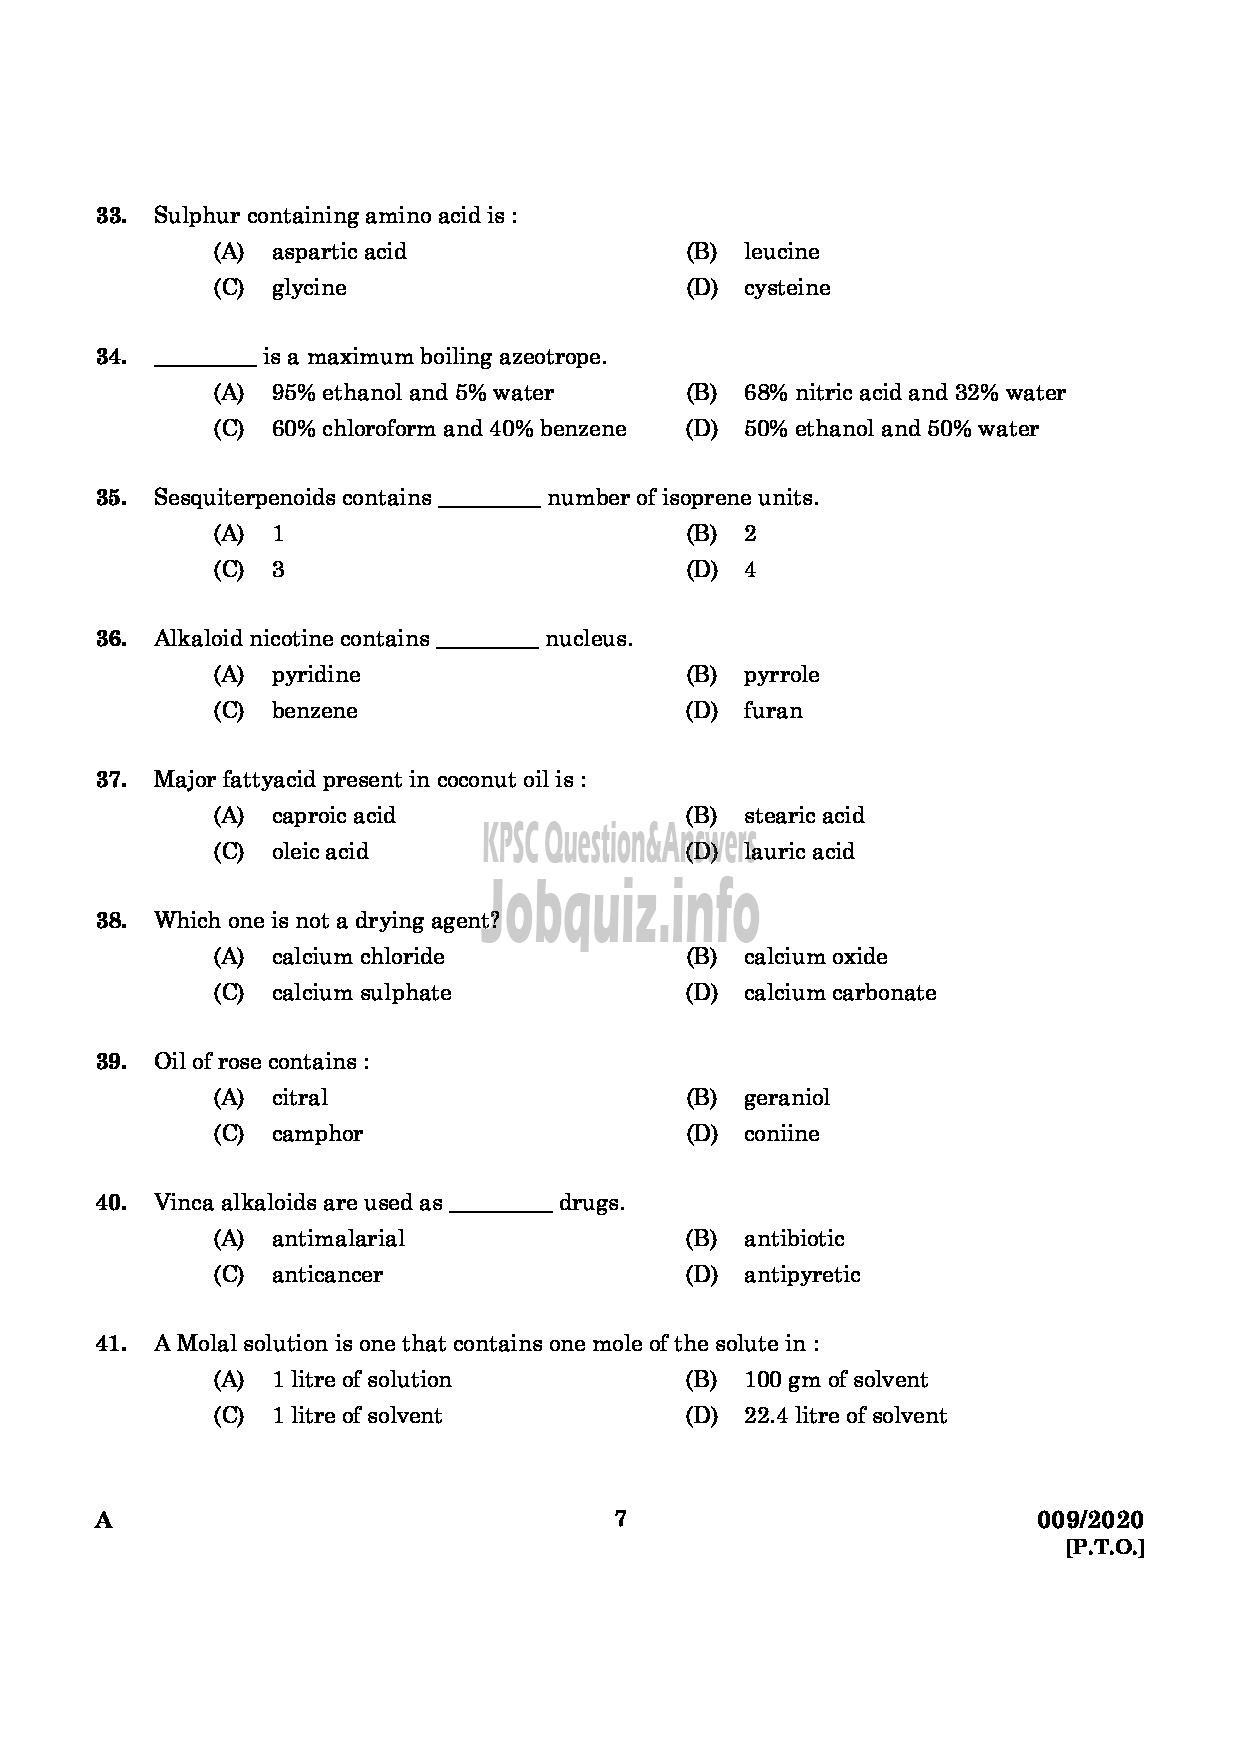 Kerala PSC Question Paper - CHEMIST IN FACTORIES AND BOILERS ENGLISH -5